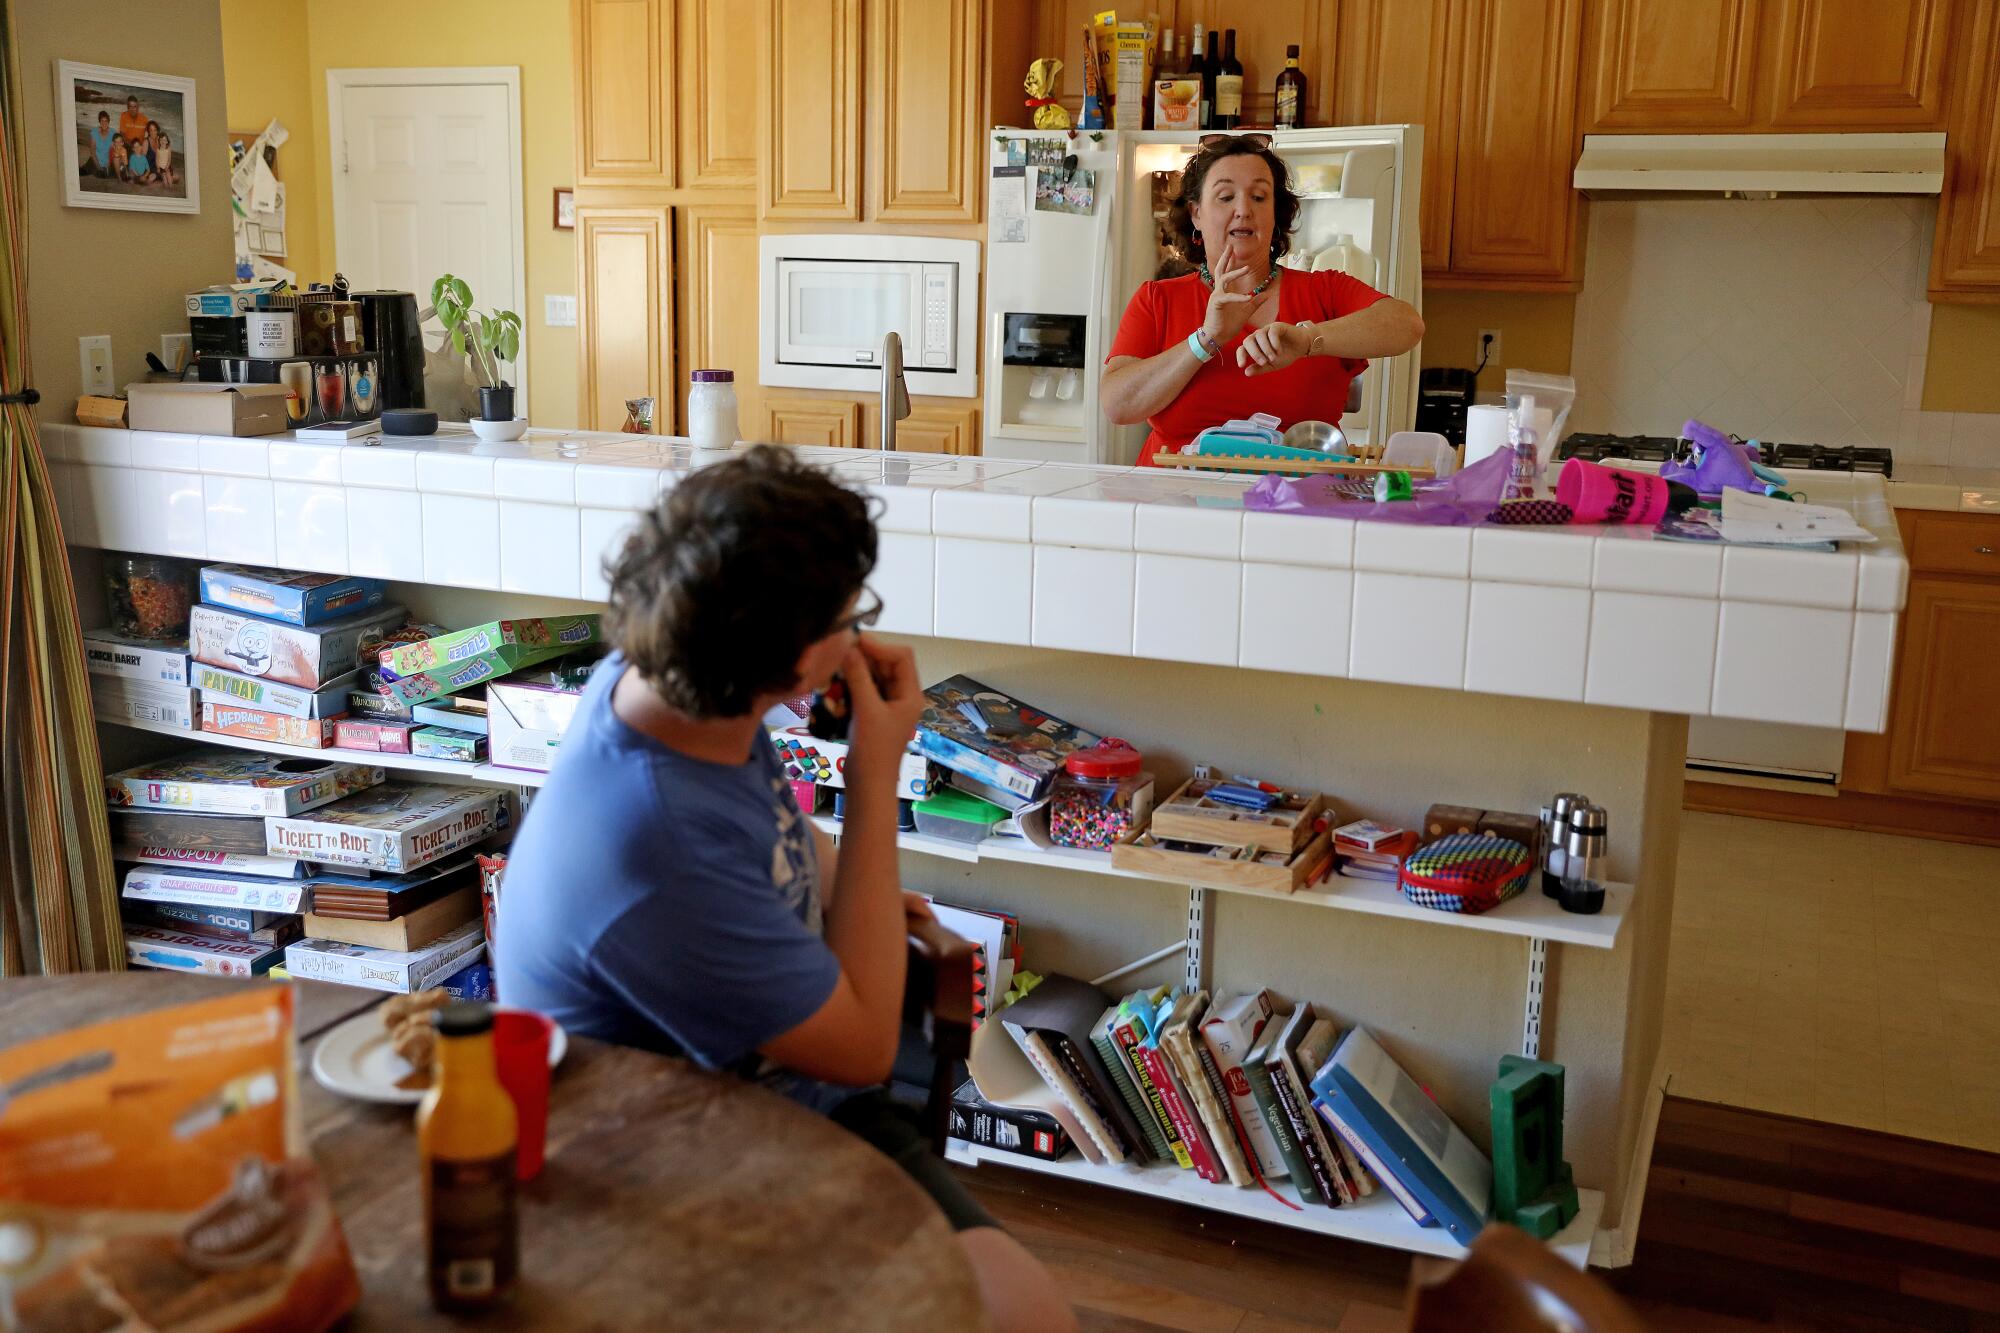 Katie Porter stands in her kitchen, gesturing at her watch as a boy turns toward her in his seat at a table in the next room